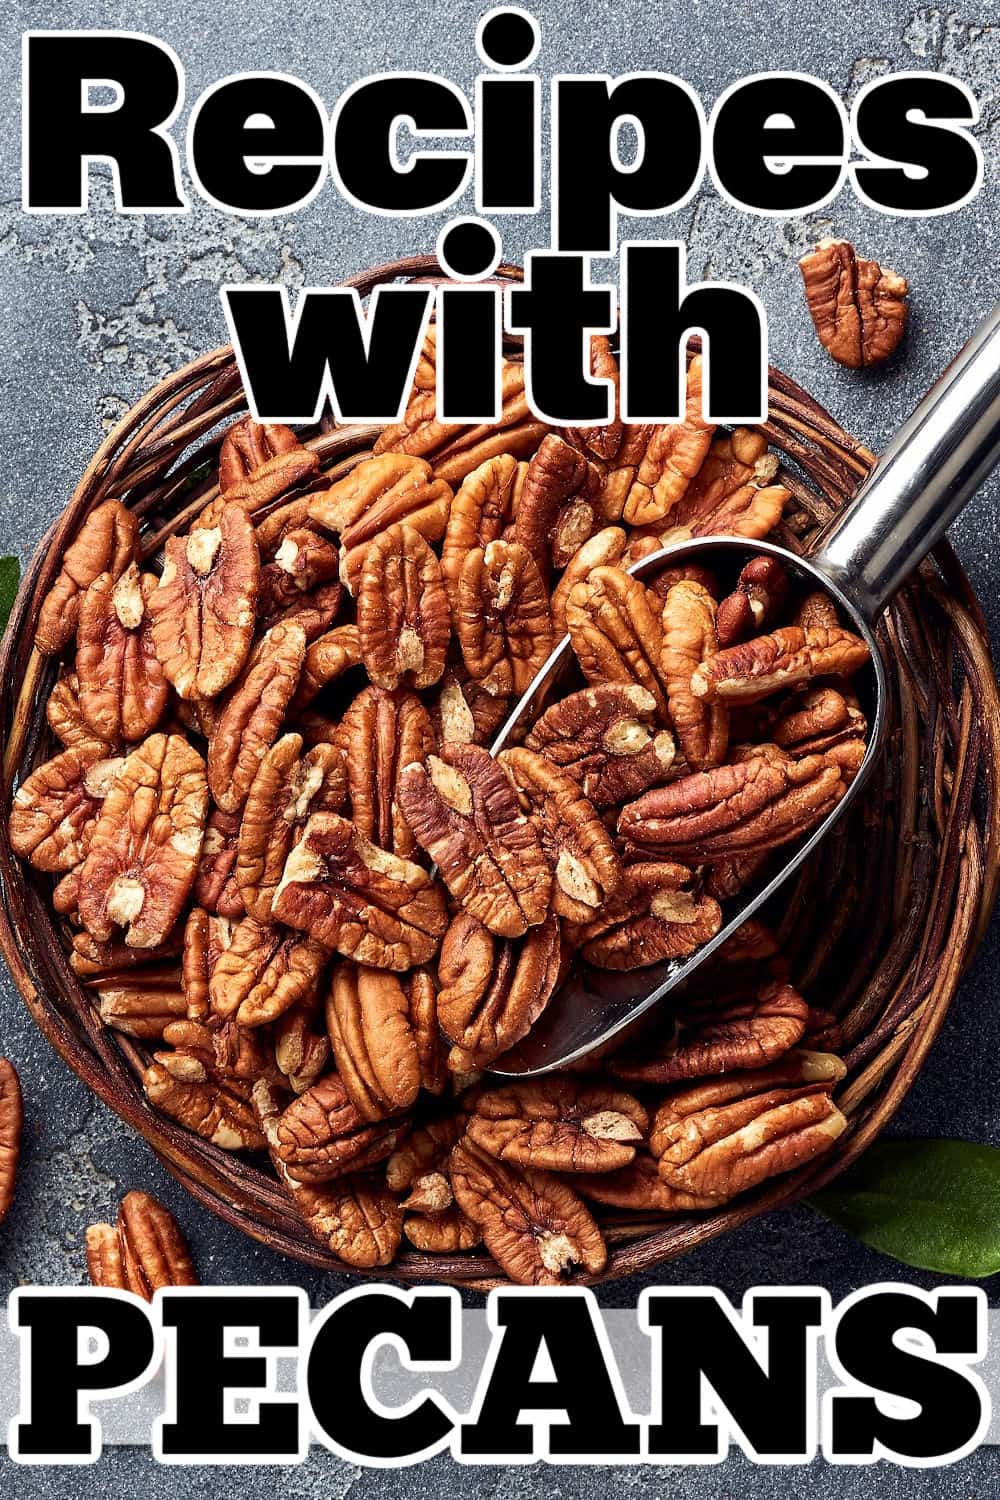 Recipes with pecans.